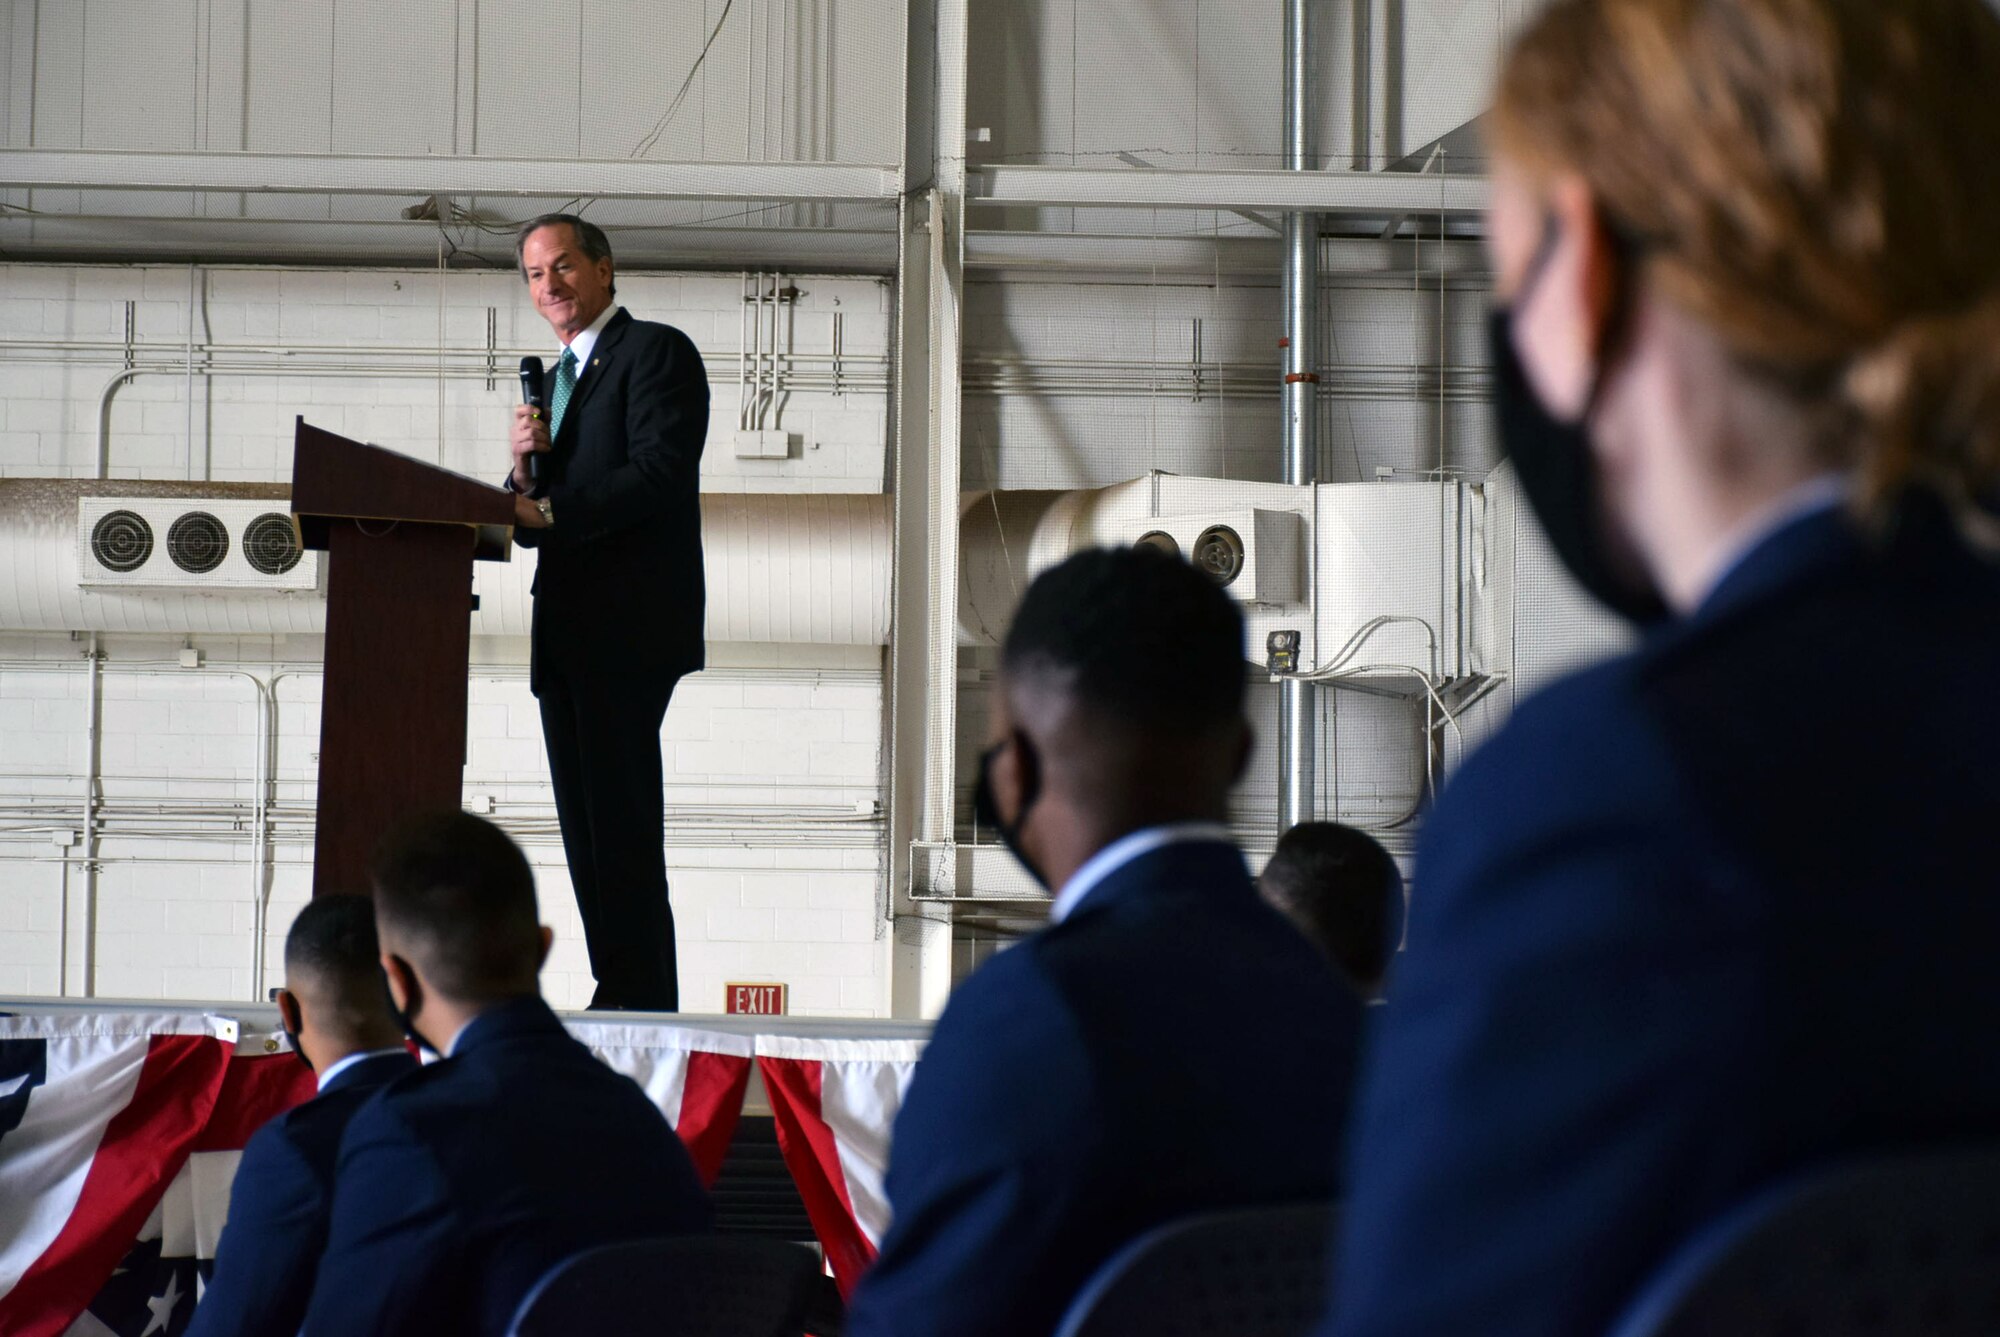 Retired Gen. David Goldfein, the 21st Chief of Staff of the Air Force, speaks to cadets during a commissioning ceremony at Joint Base San Antonio-Lackland, Texas May 14, 2021.